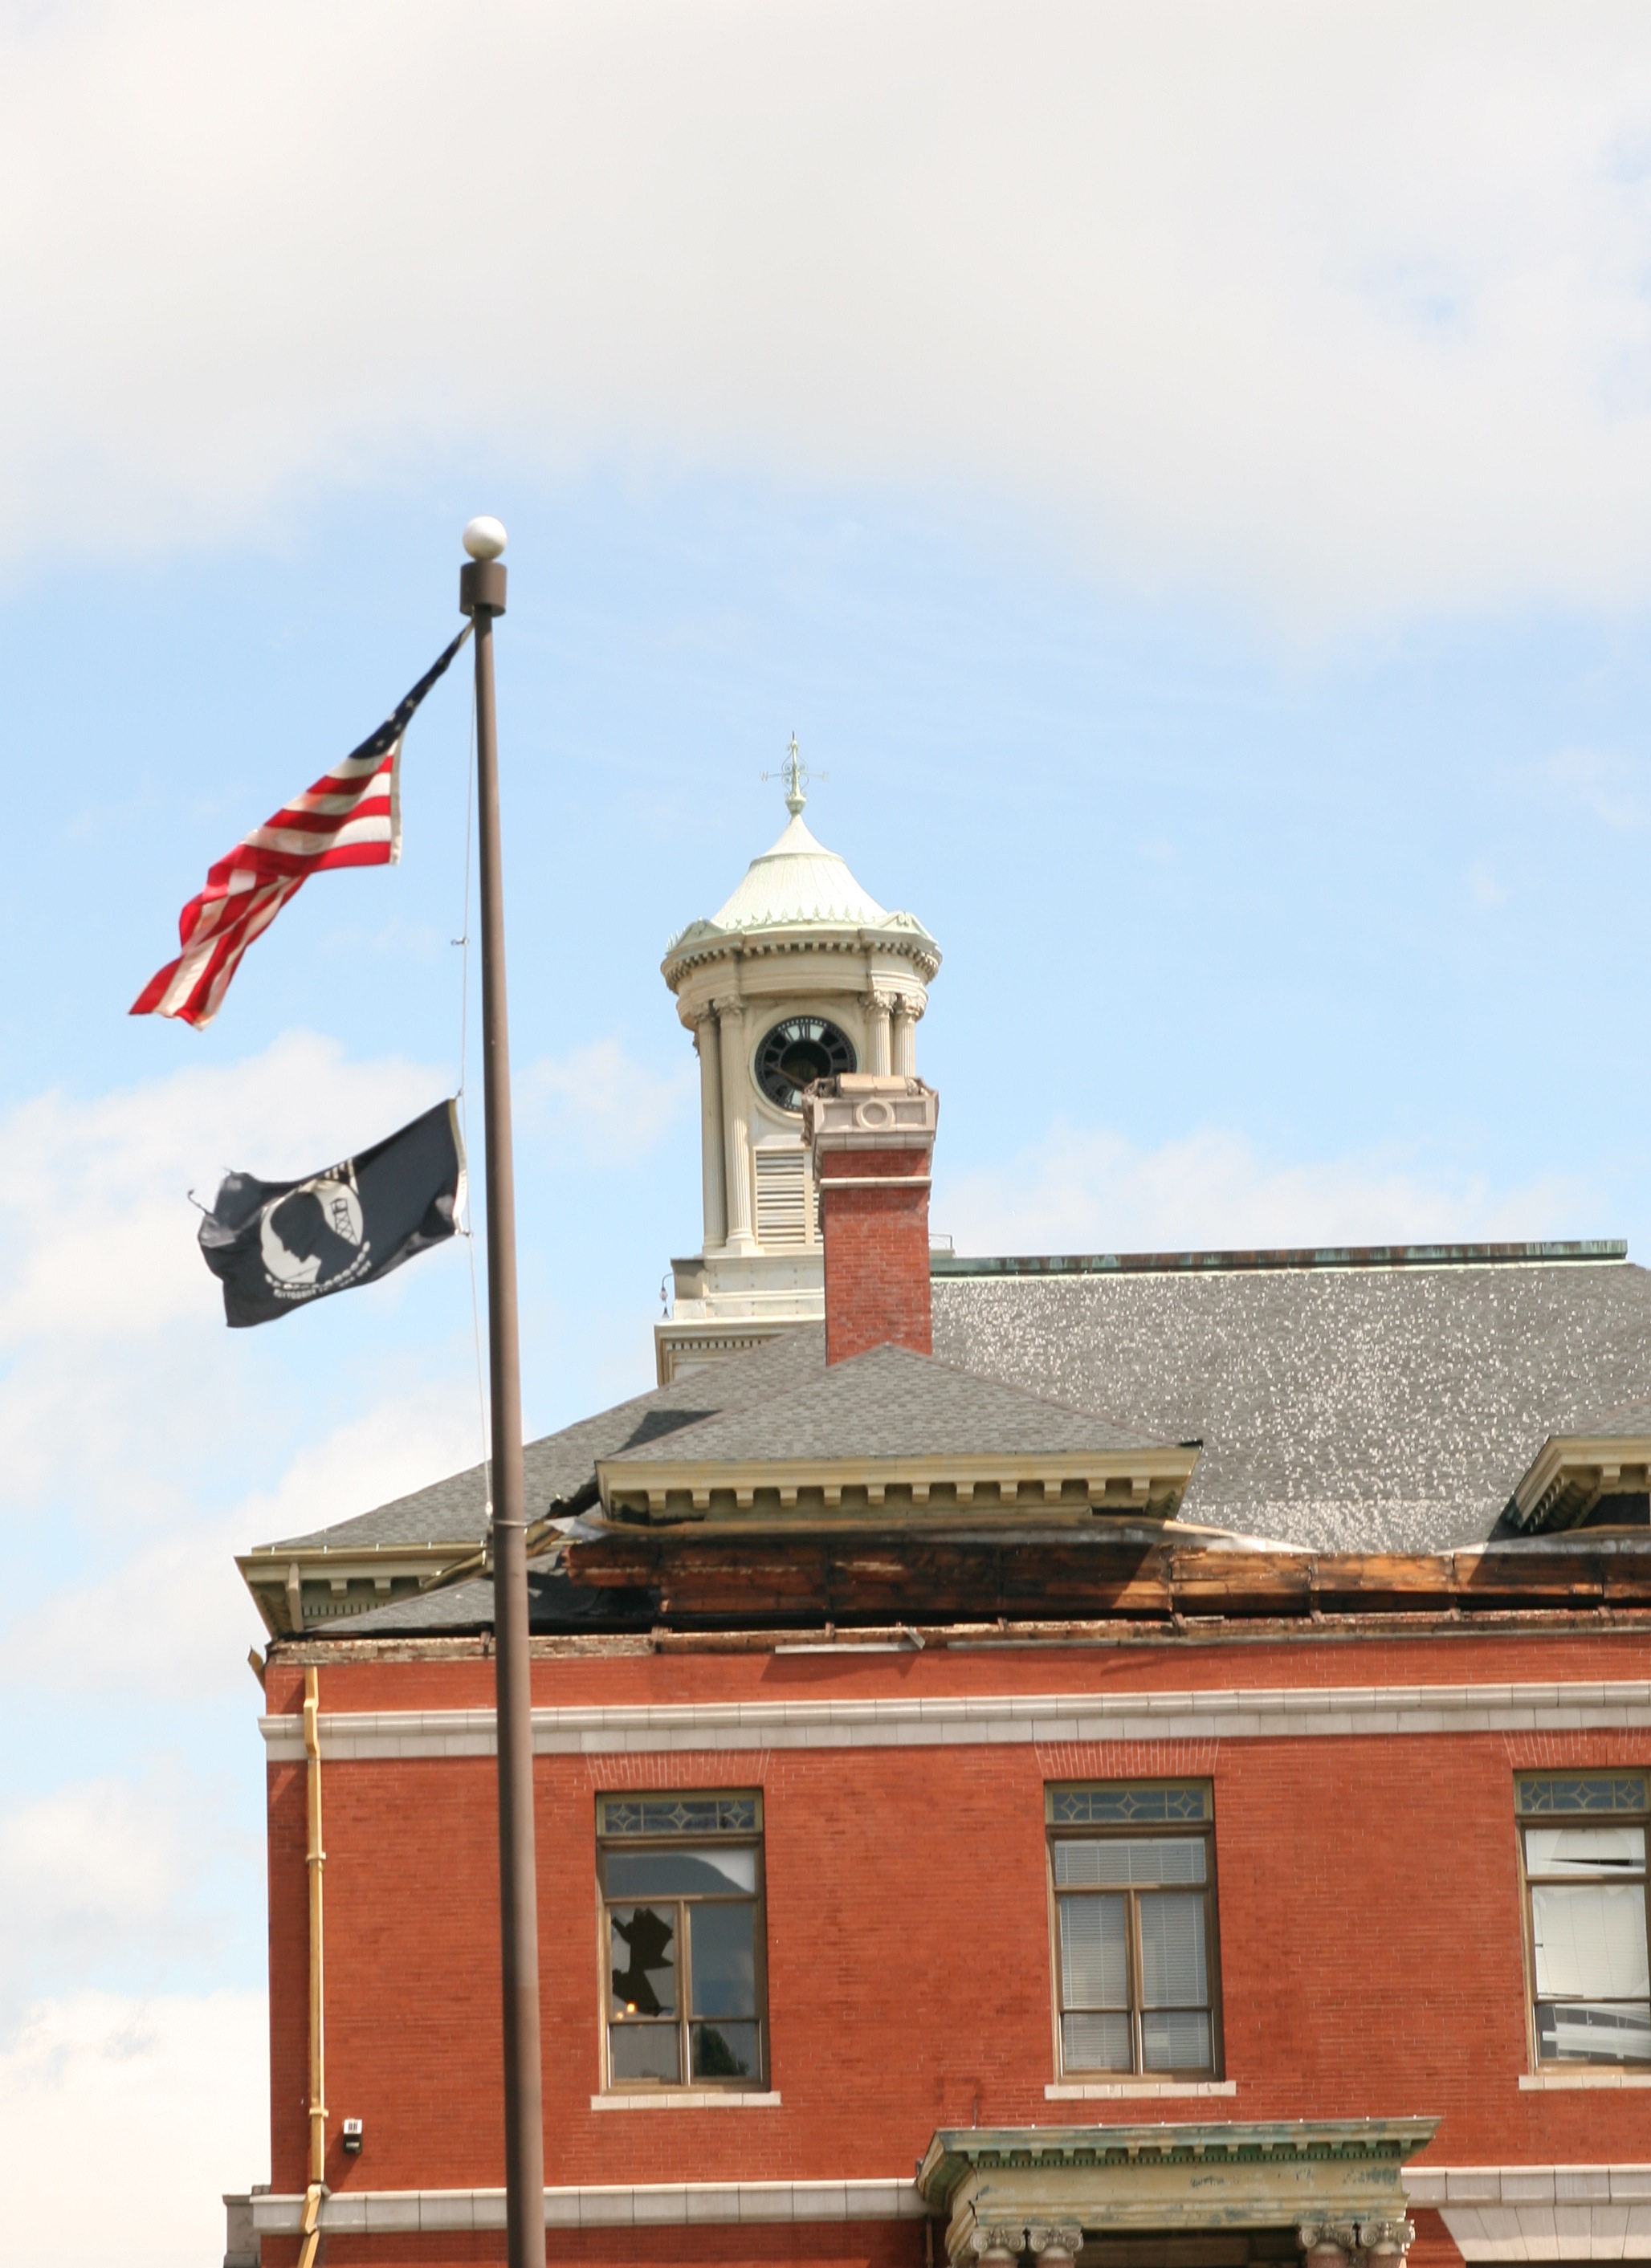 The American flag at City Hall hangs on by a thread as windows, the clock and the roof show the tremendous damage done to the Hall by the tornado. City Hall will remain closed until further notice.